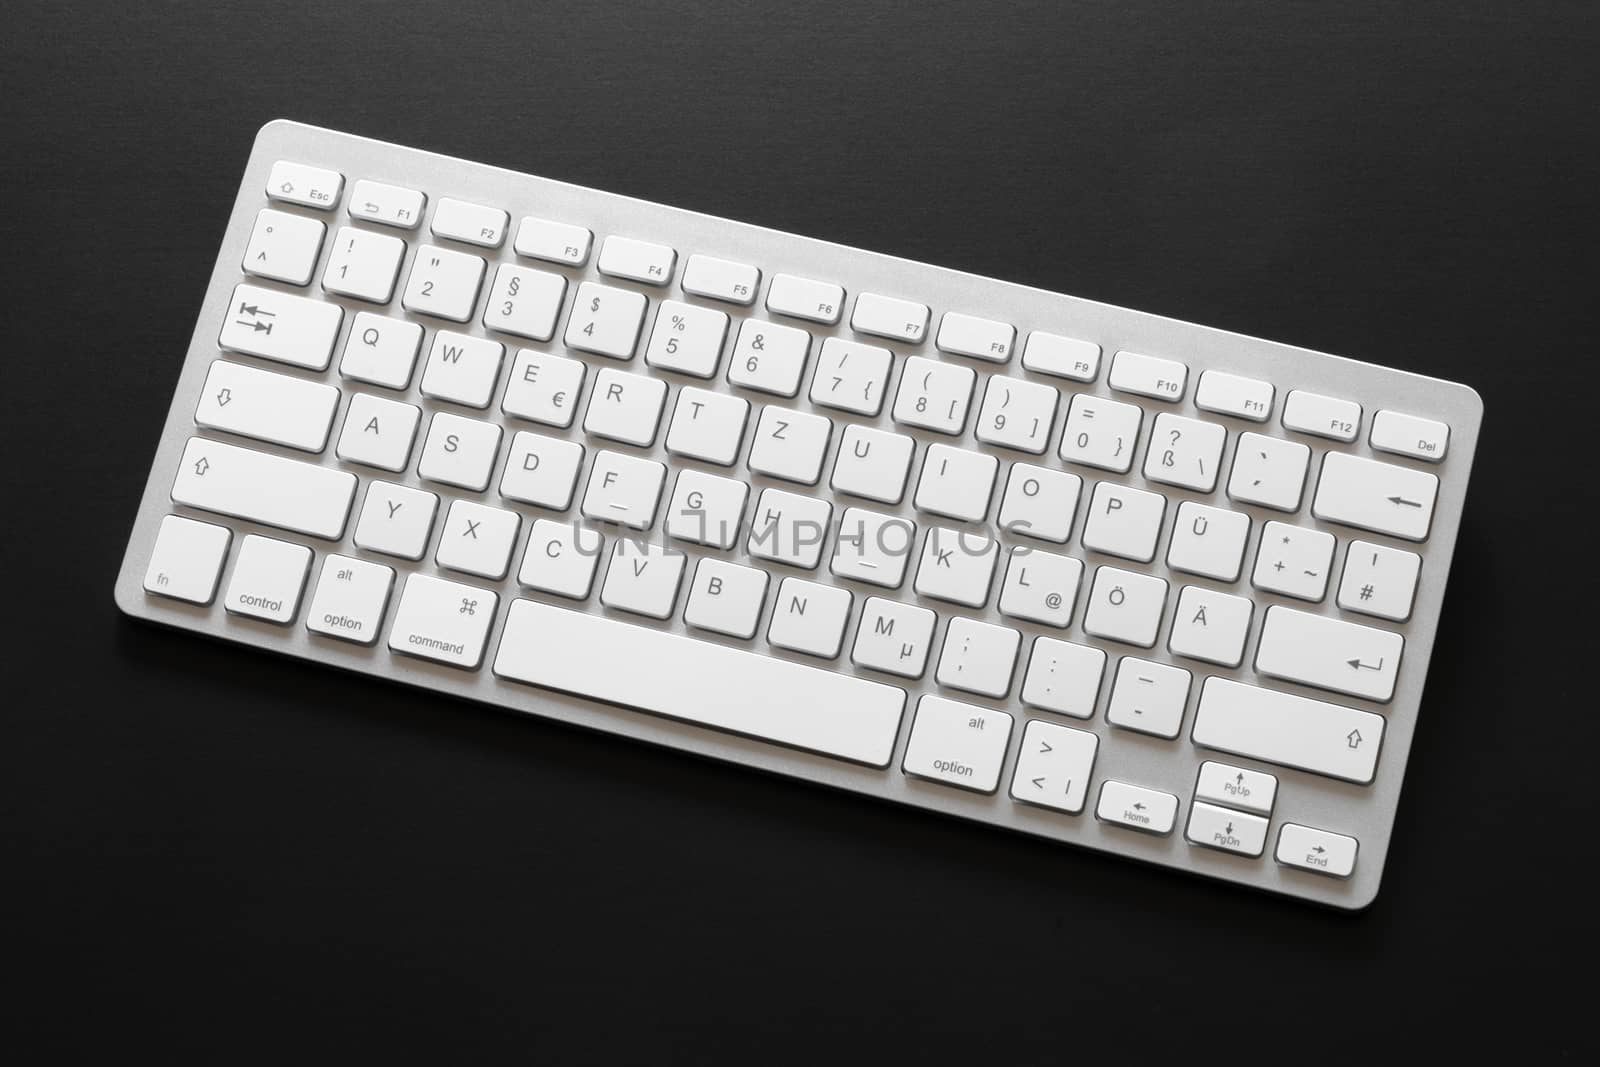 An image of a typical computer keyboard isolated on black background